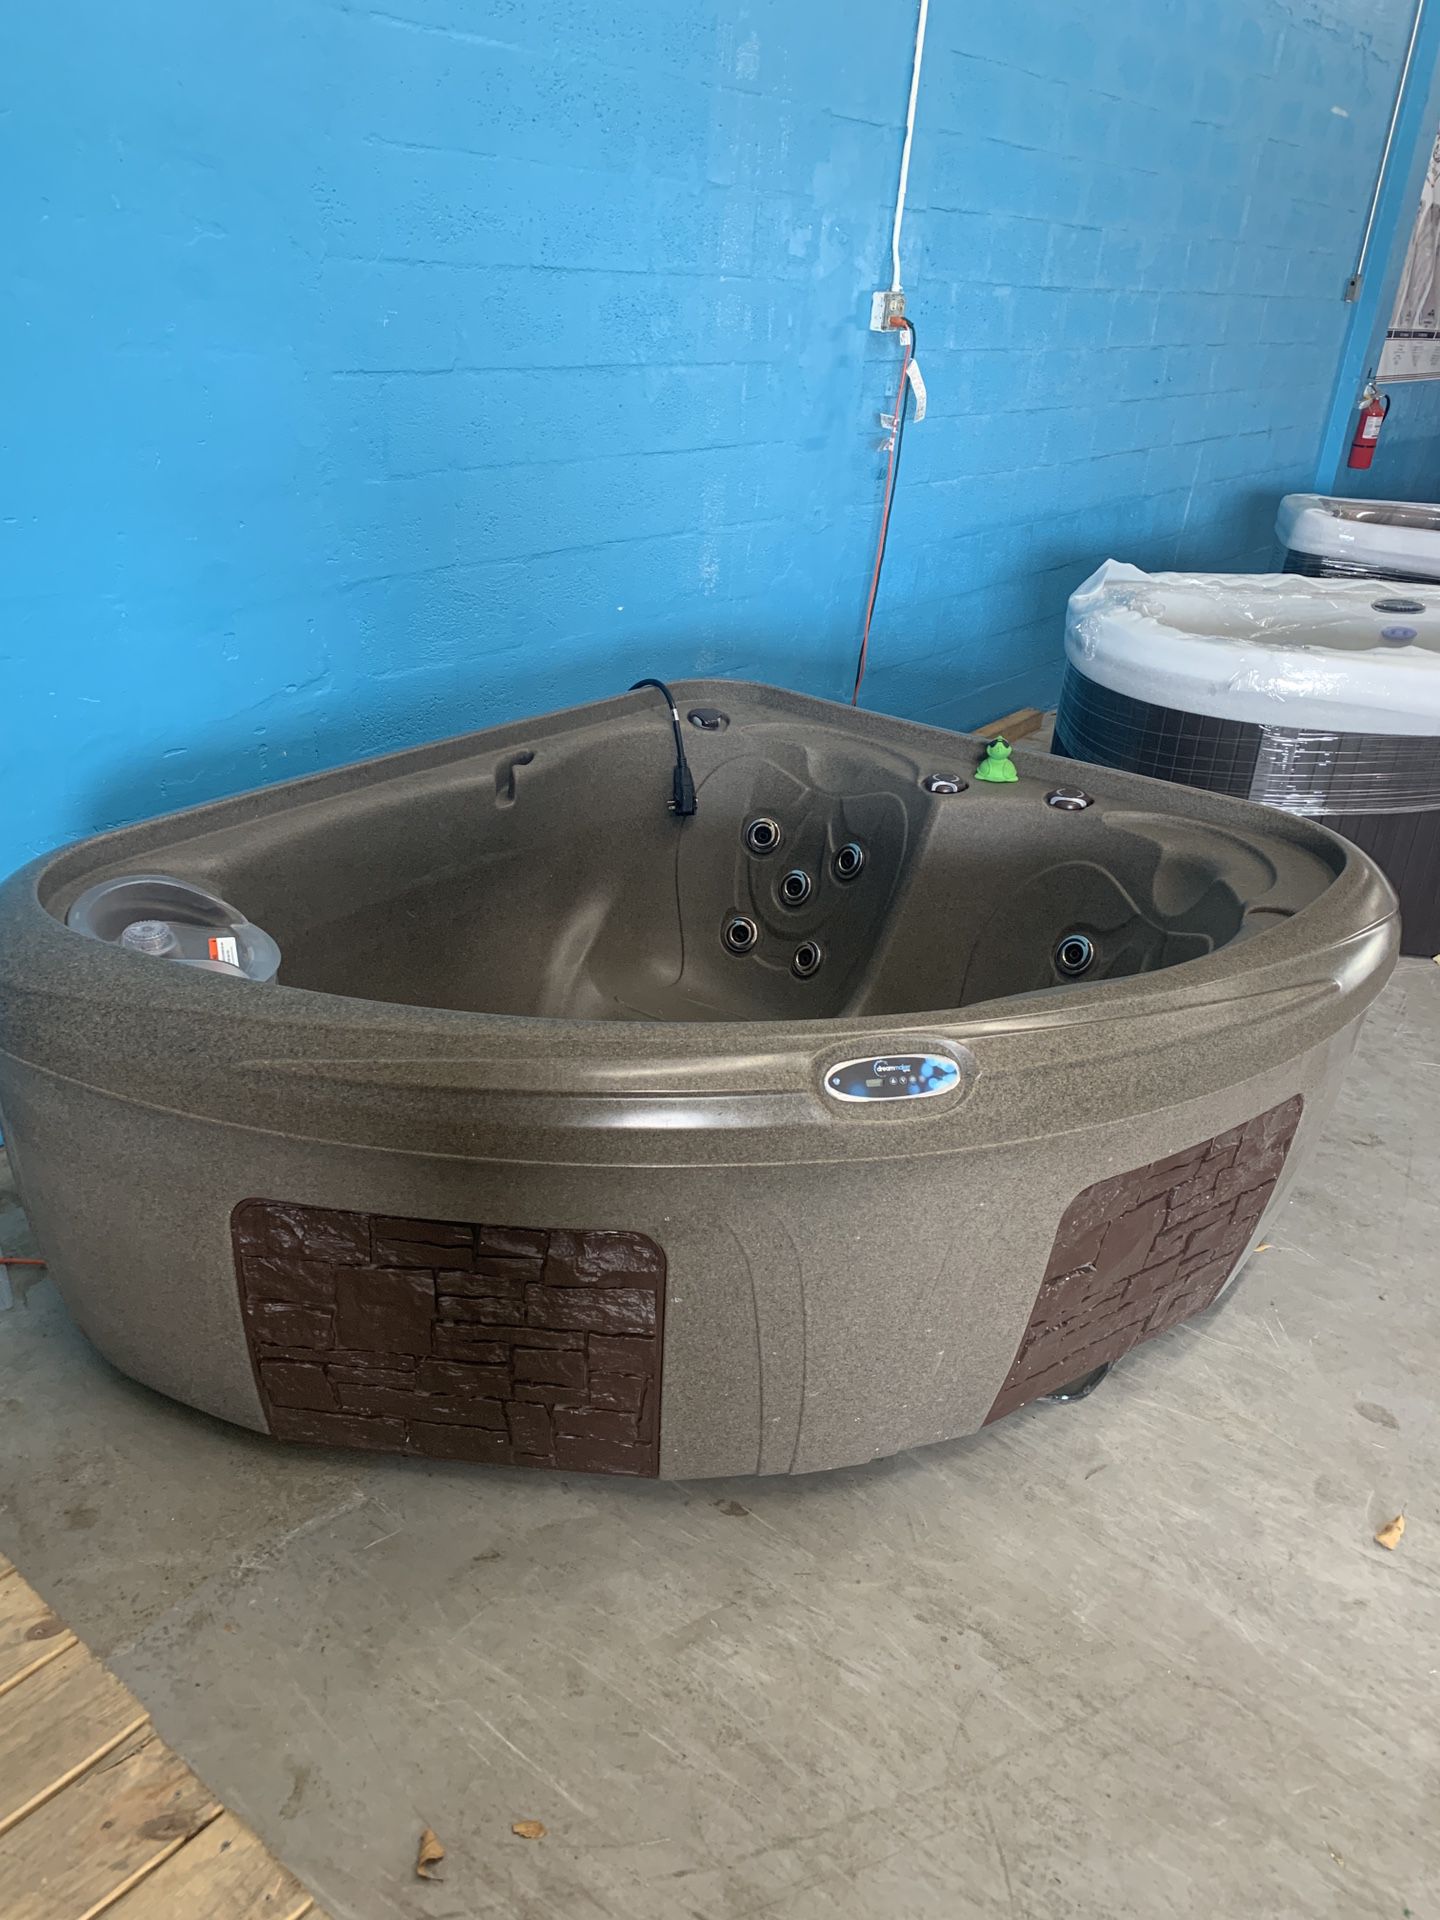 2 person hot tub in stock and ready for delivery!